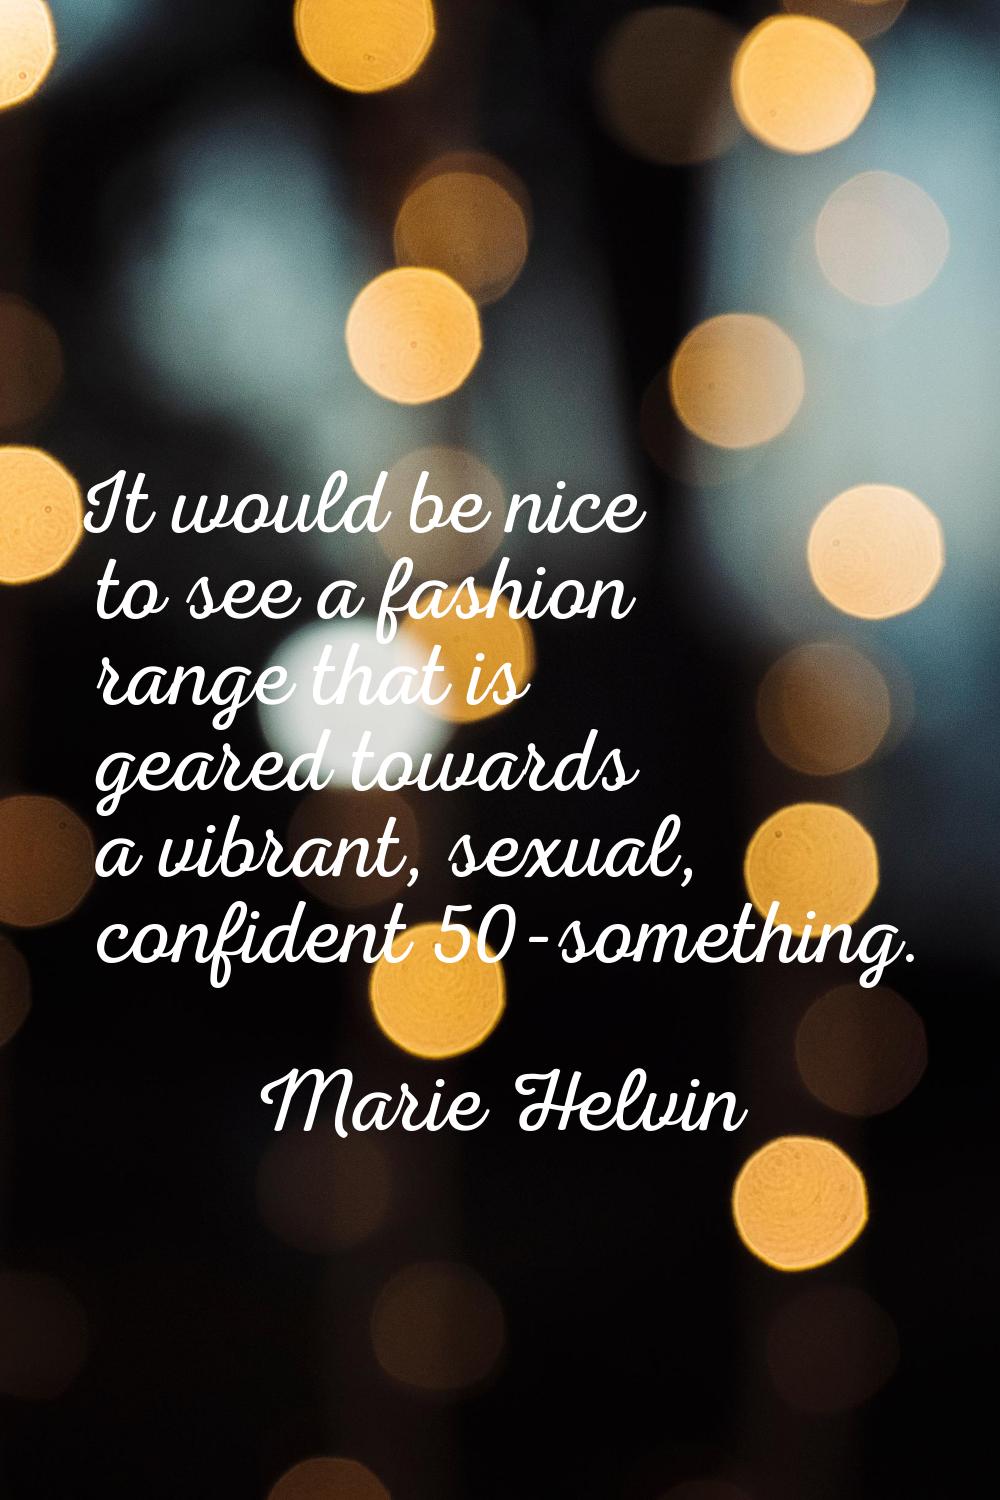 It would be nice to see a fashion range that is geared towards a vibrant, sexual, confident 50-some